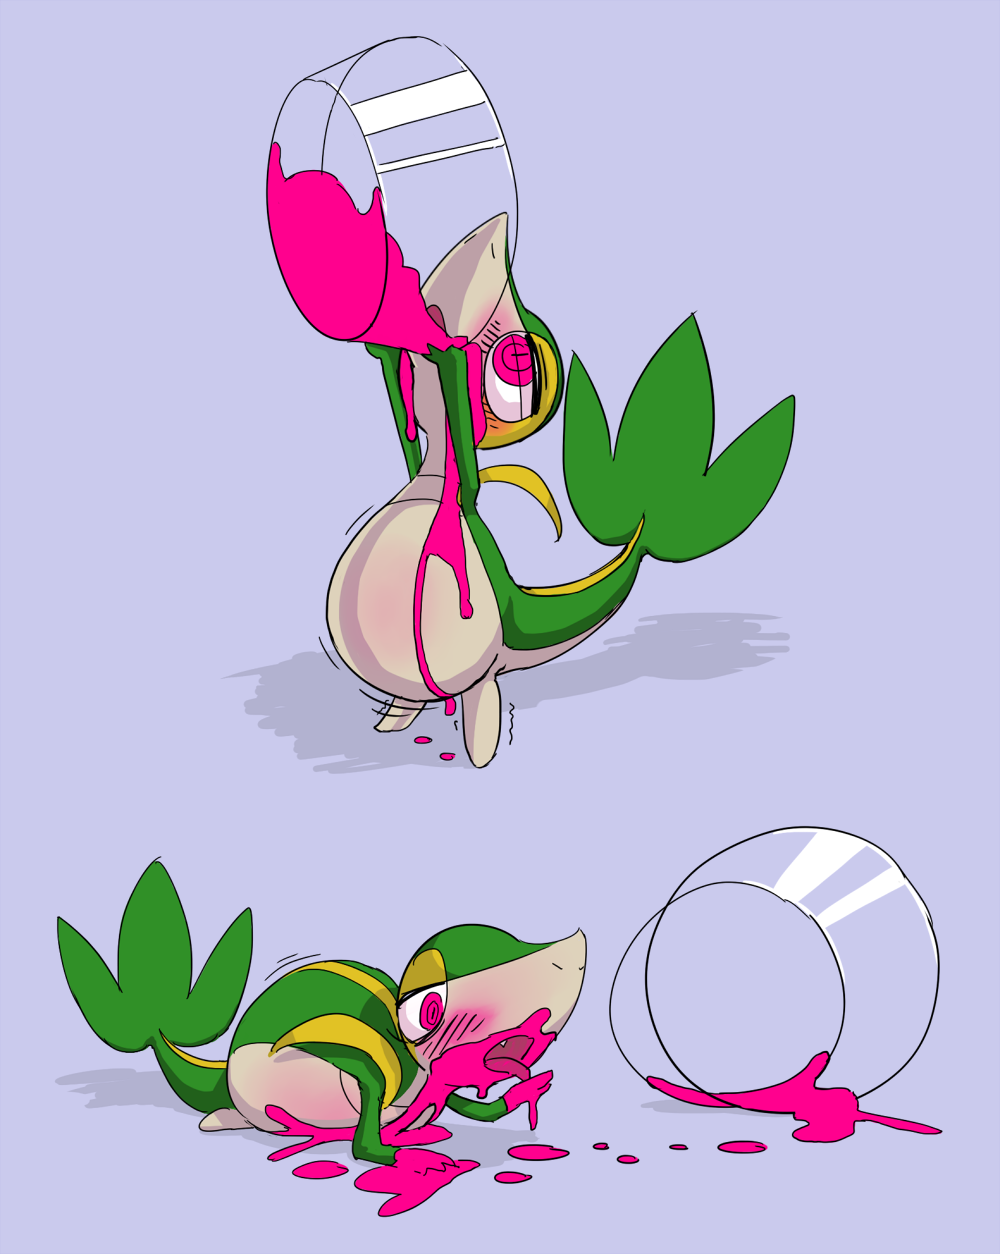 Snivy inflation